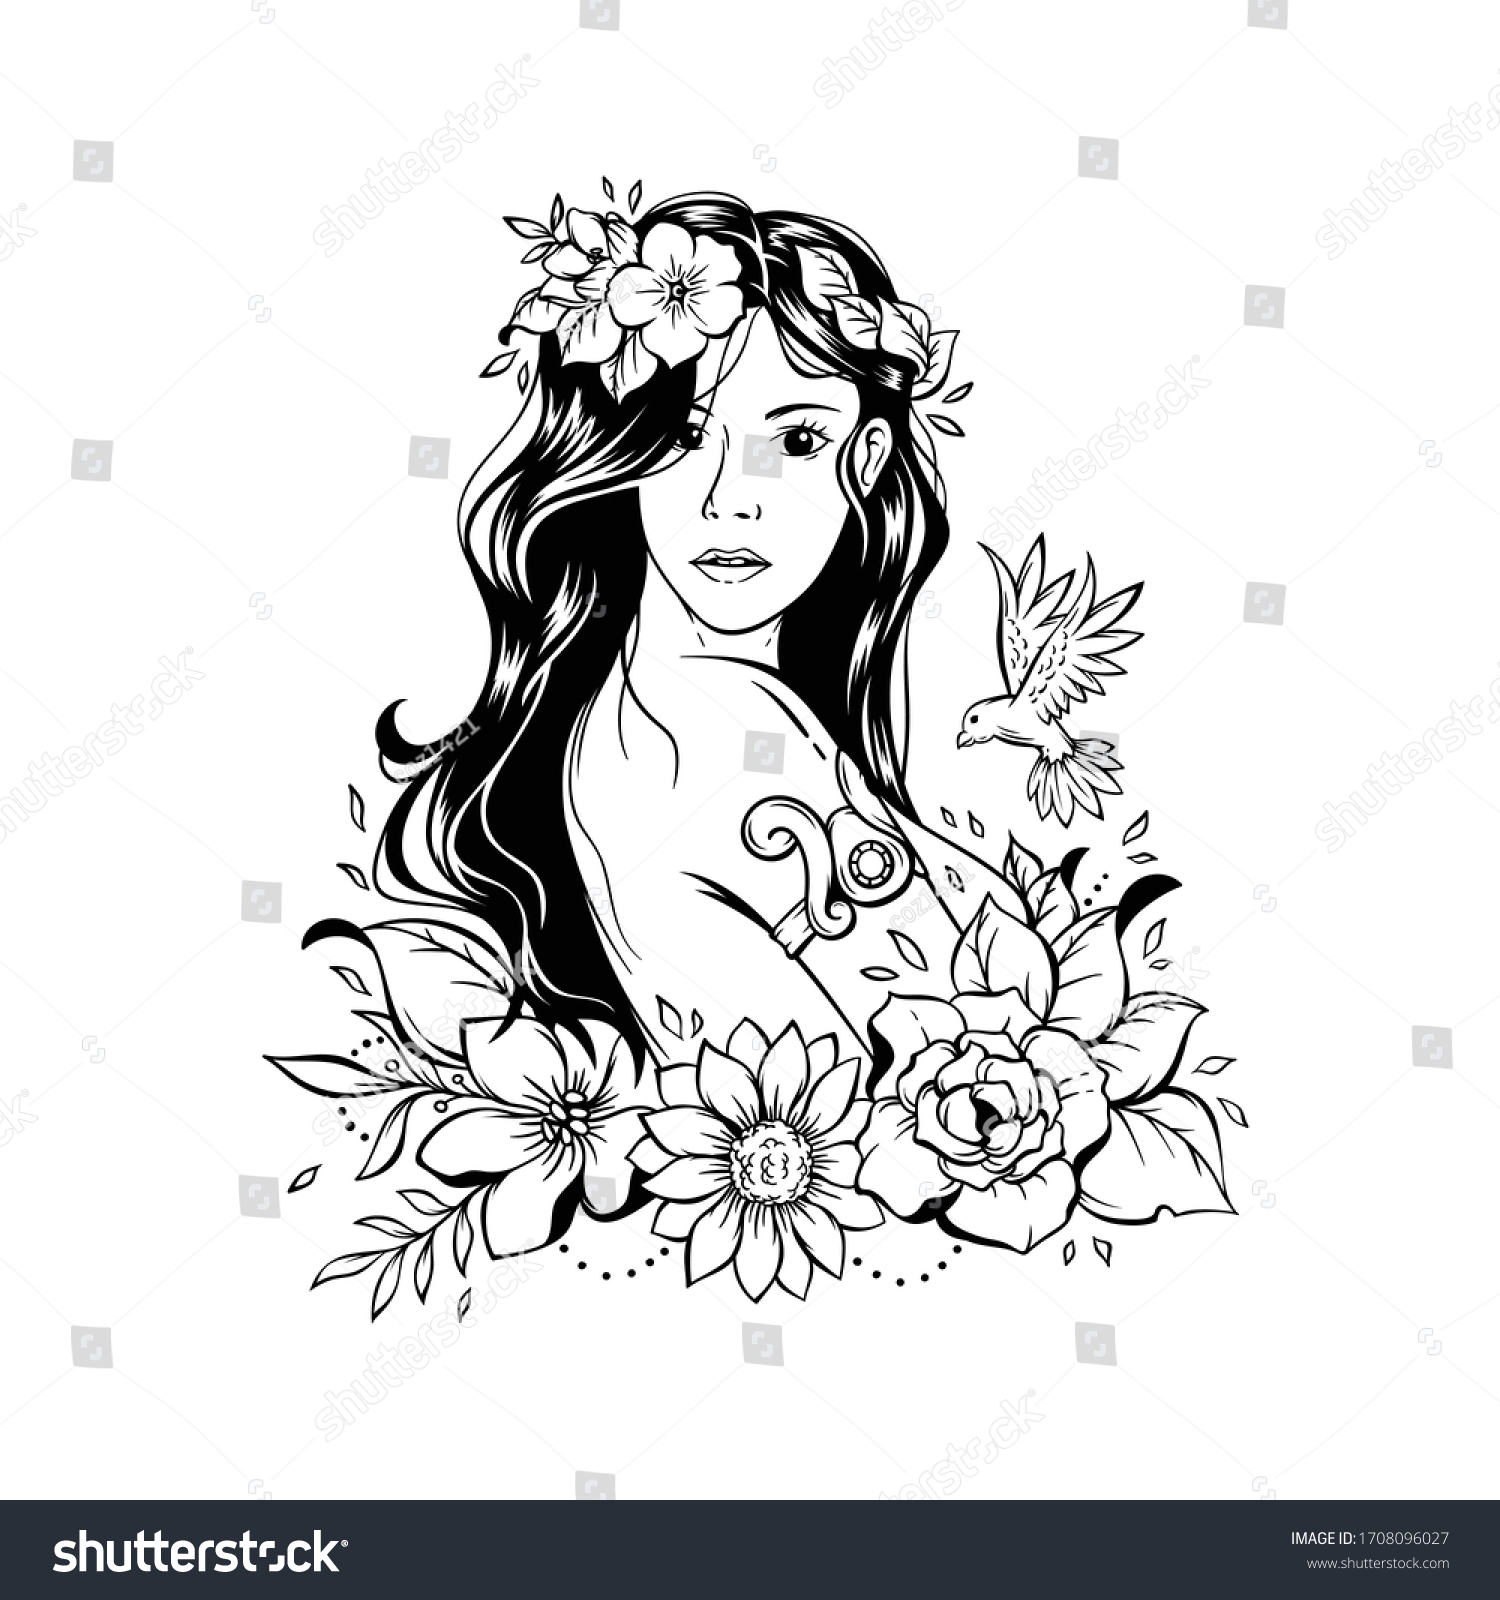 SVG of Illustration beautiful girl with floral svg